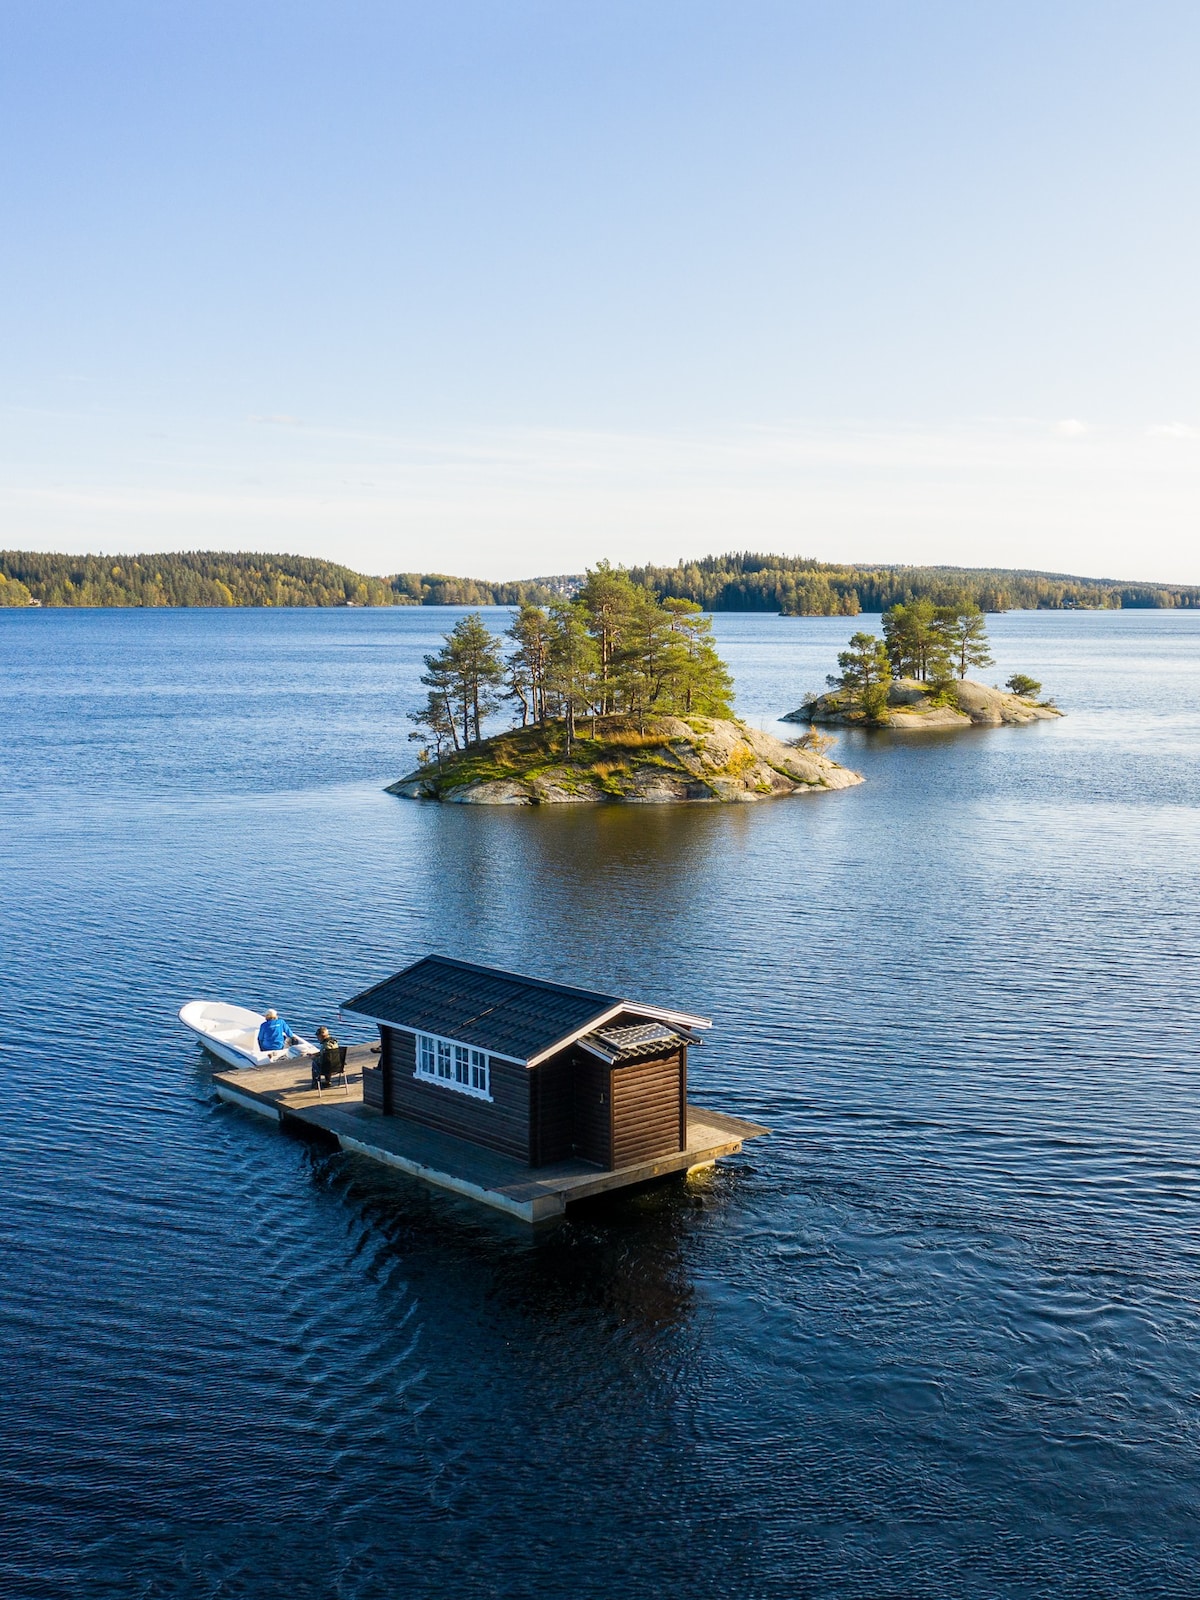 Explore Swedish Nature in our floating cottage #5